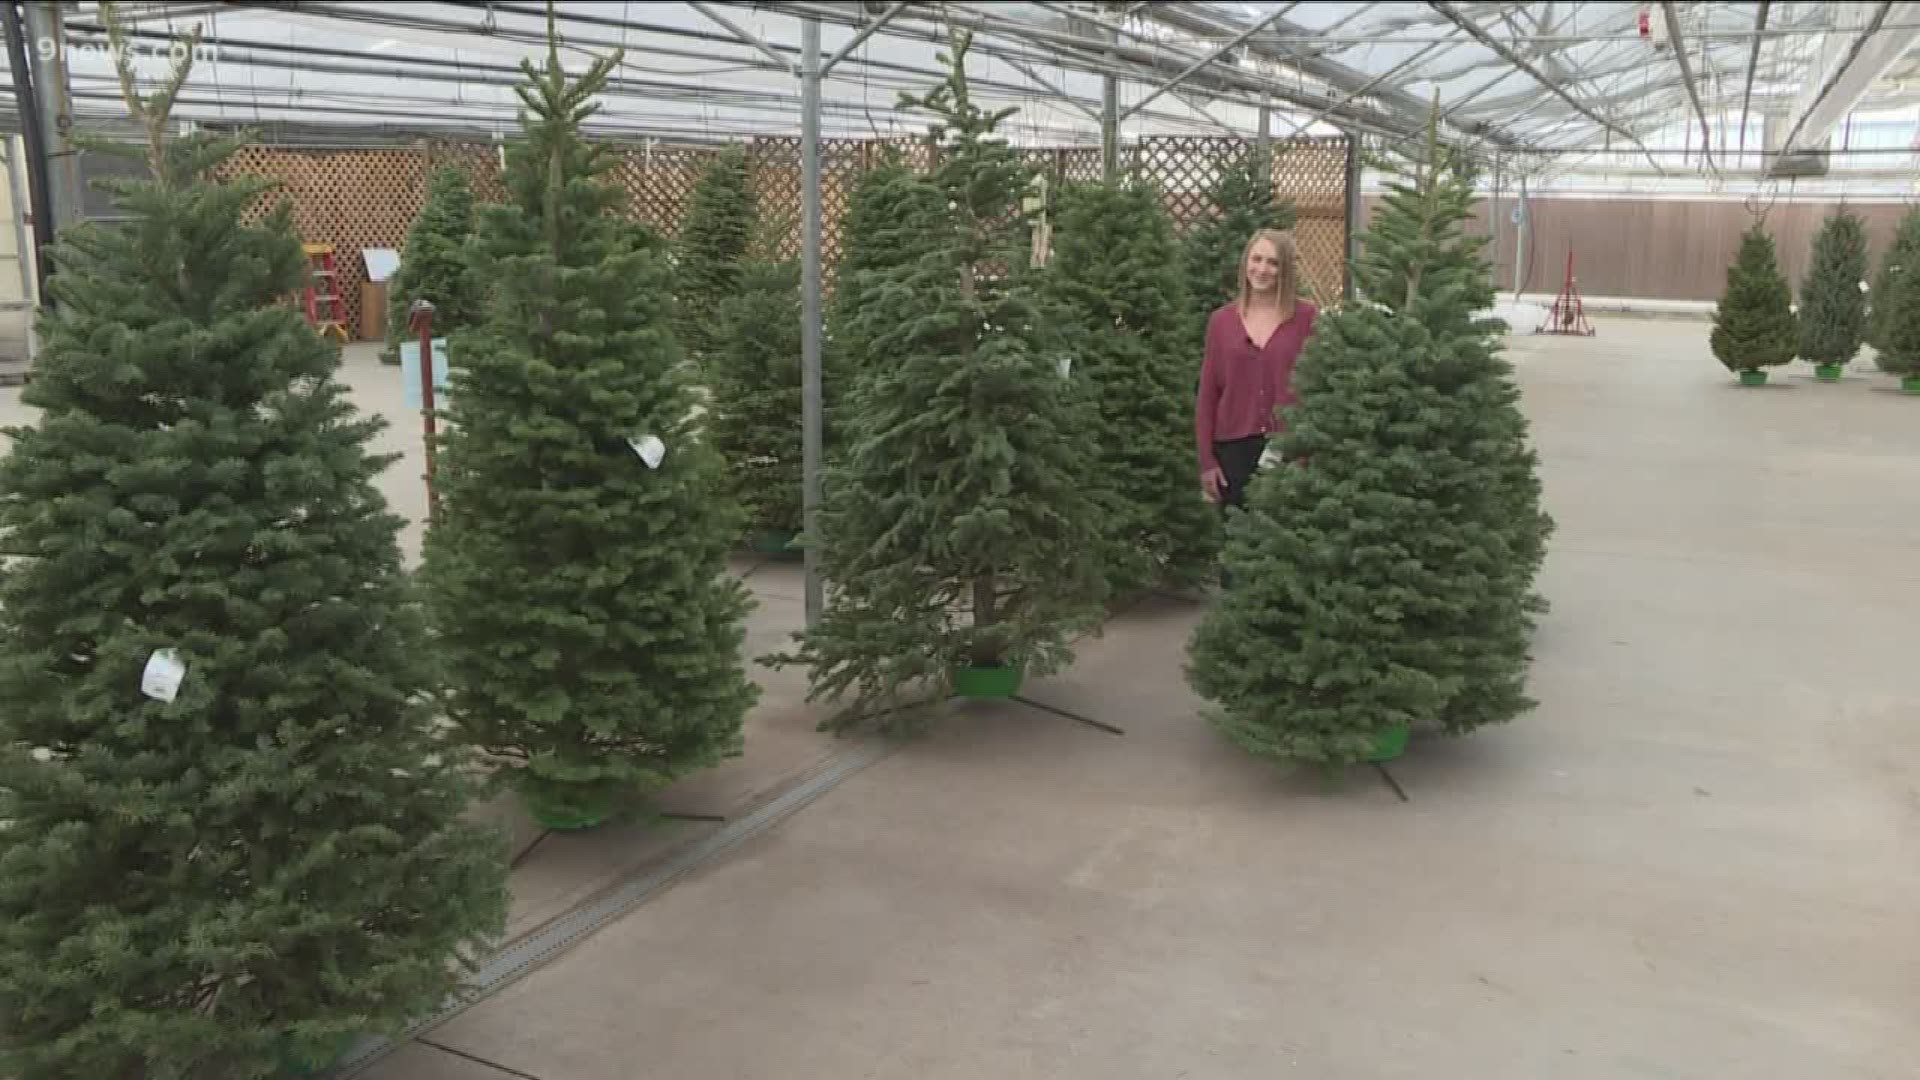 For the second year in a row, Echter's Nursery and Garden Center in Arvada is hosting its giveaway on Monday, Dec. 23.